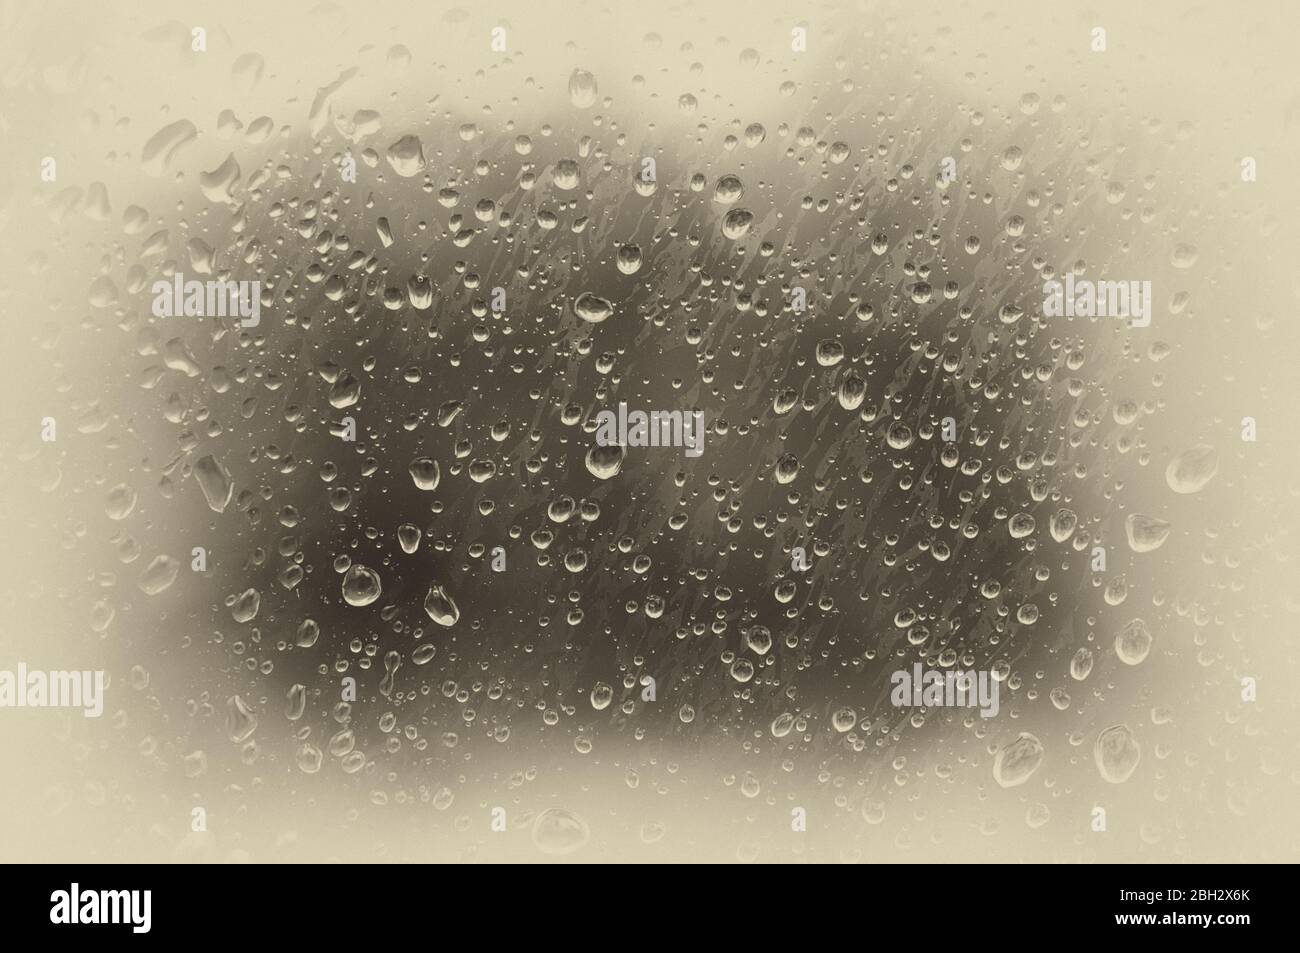 Drops of water on the misted glass. Toned photo, soft focus. Original vintage background with vignetting Stock Photo